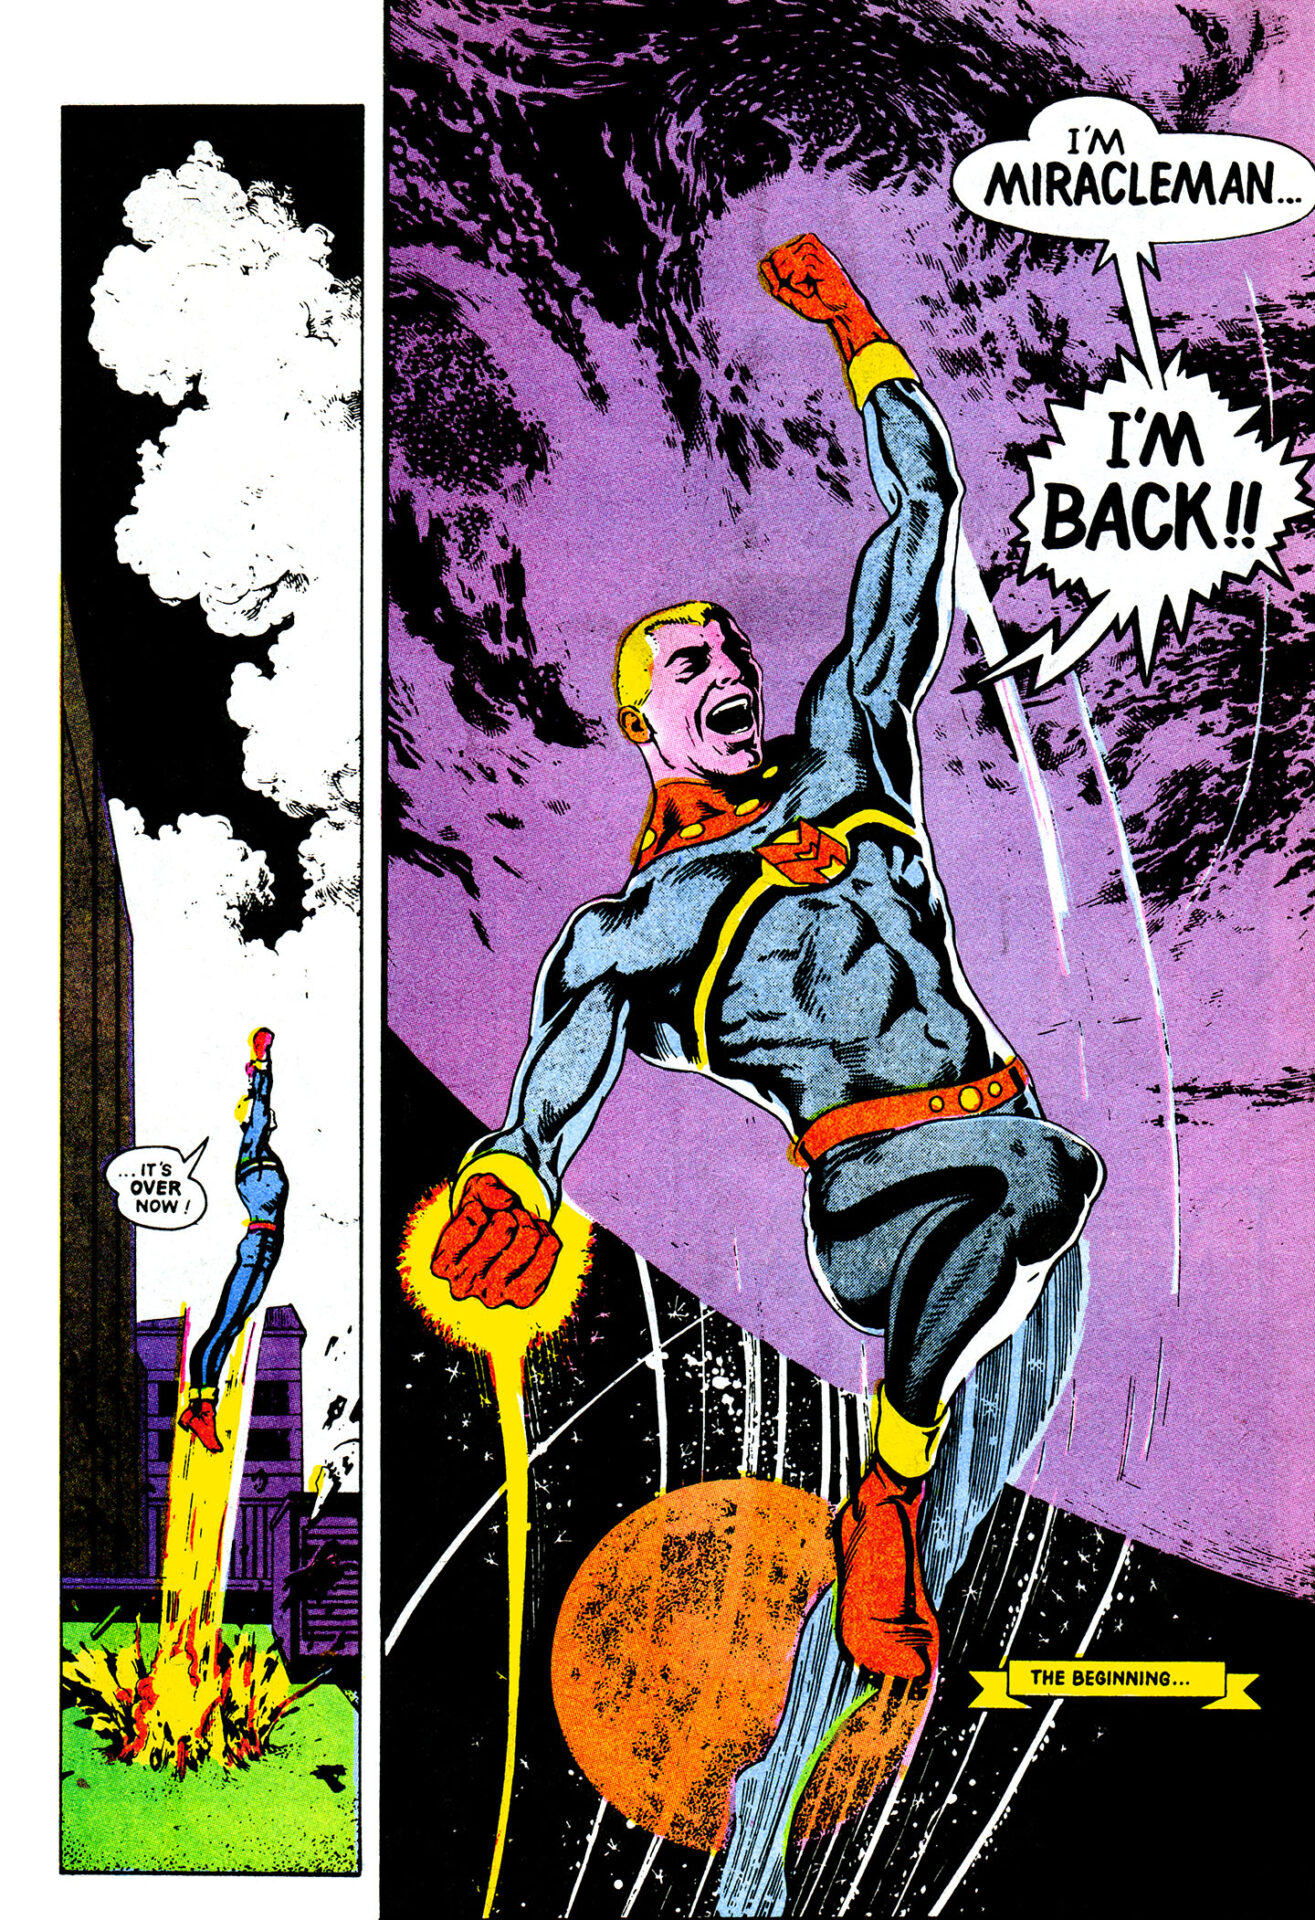 The eponymous hero returns in Miracleman Vol. 1 #1 "...A Dream of Flying" (1985), Eclipse Comics. Words by Alan Moore, art by Garry Leach and Steve Oliff.